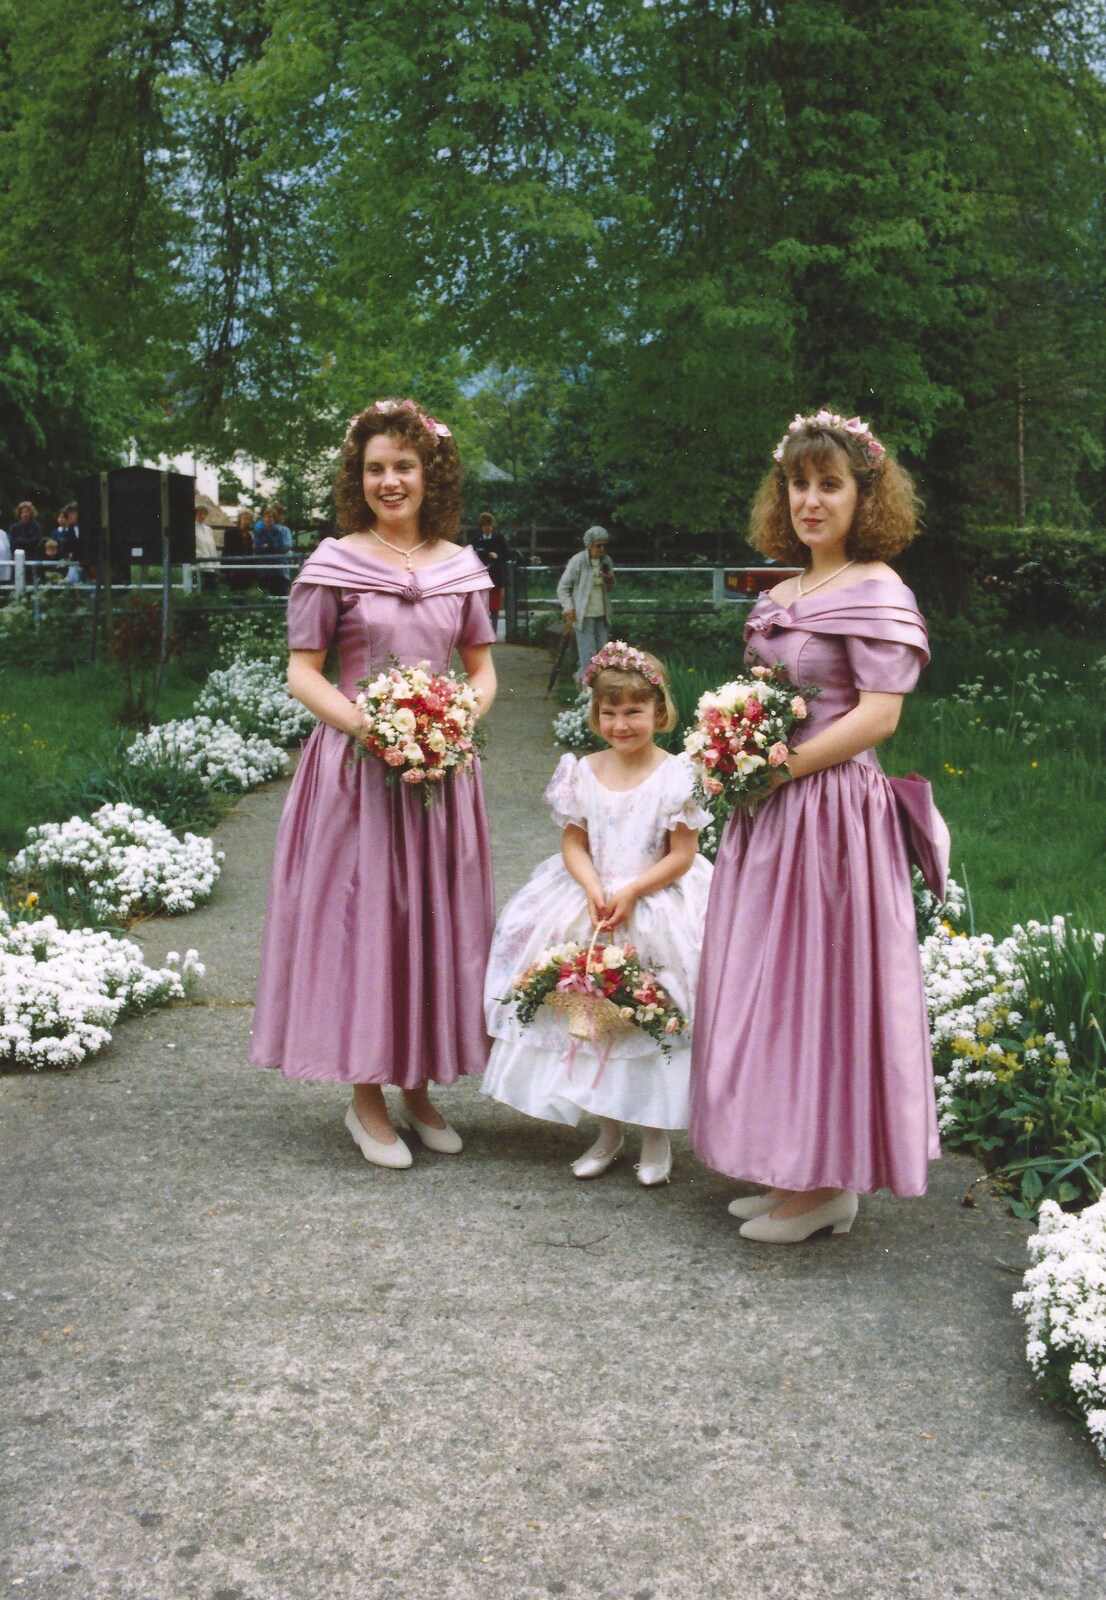 The bridesmaids in the churchyard from Debbie's Wedding, Suffolk - 12th June 1999